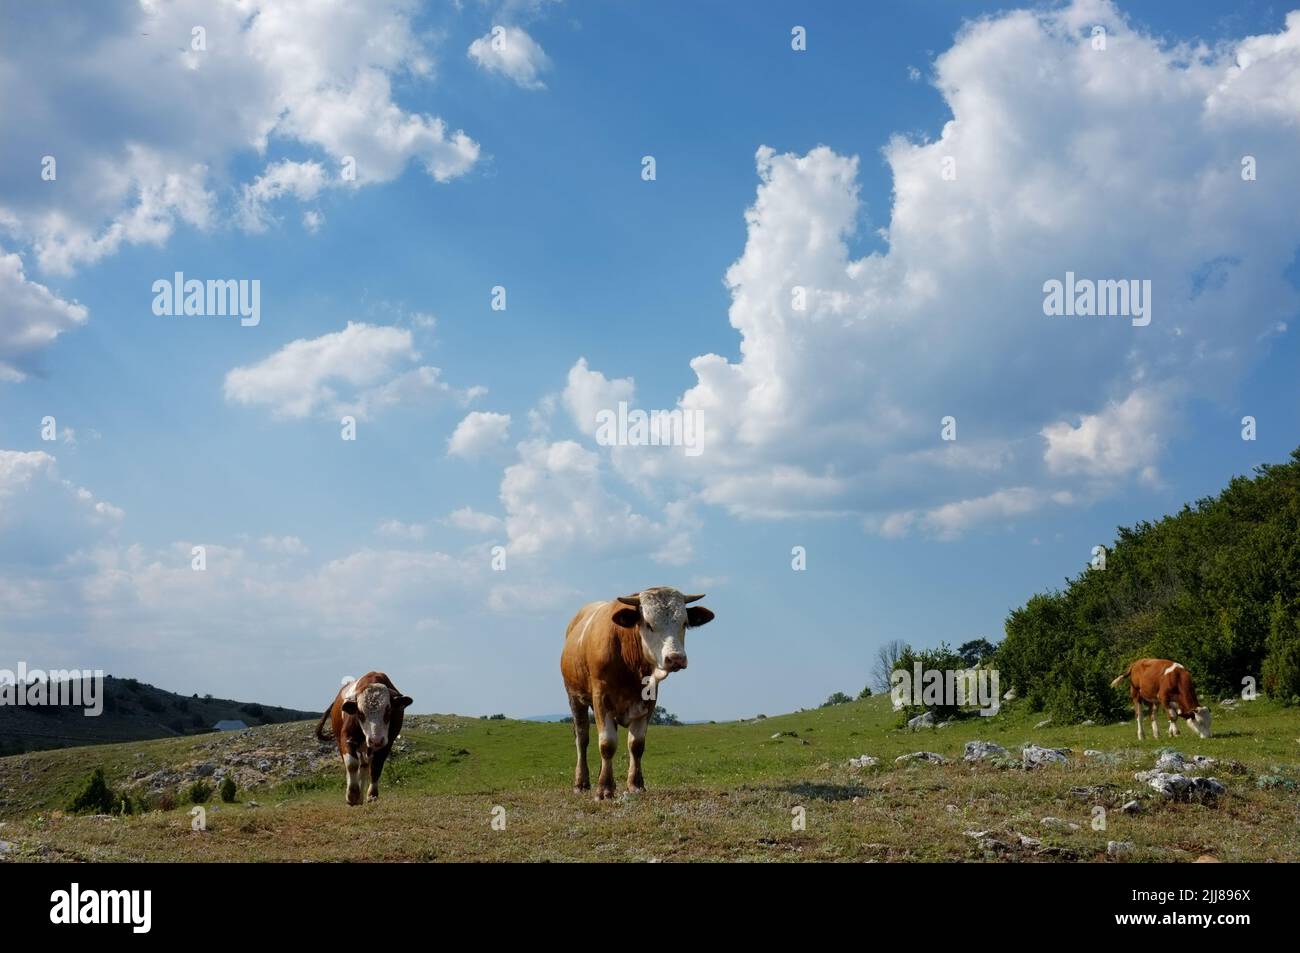 cows against clouds sky on rural landscape of Serbia Stock Photo